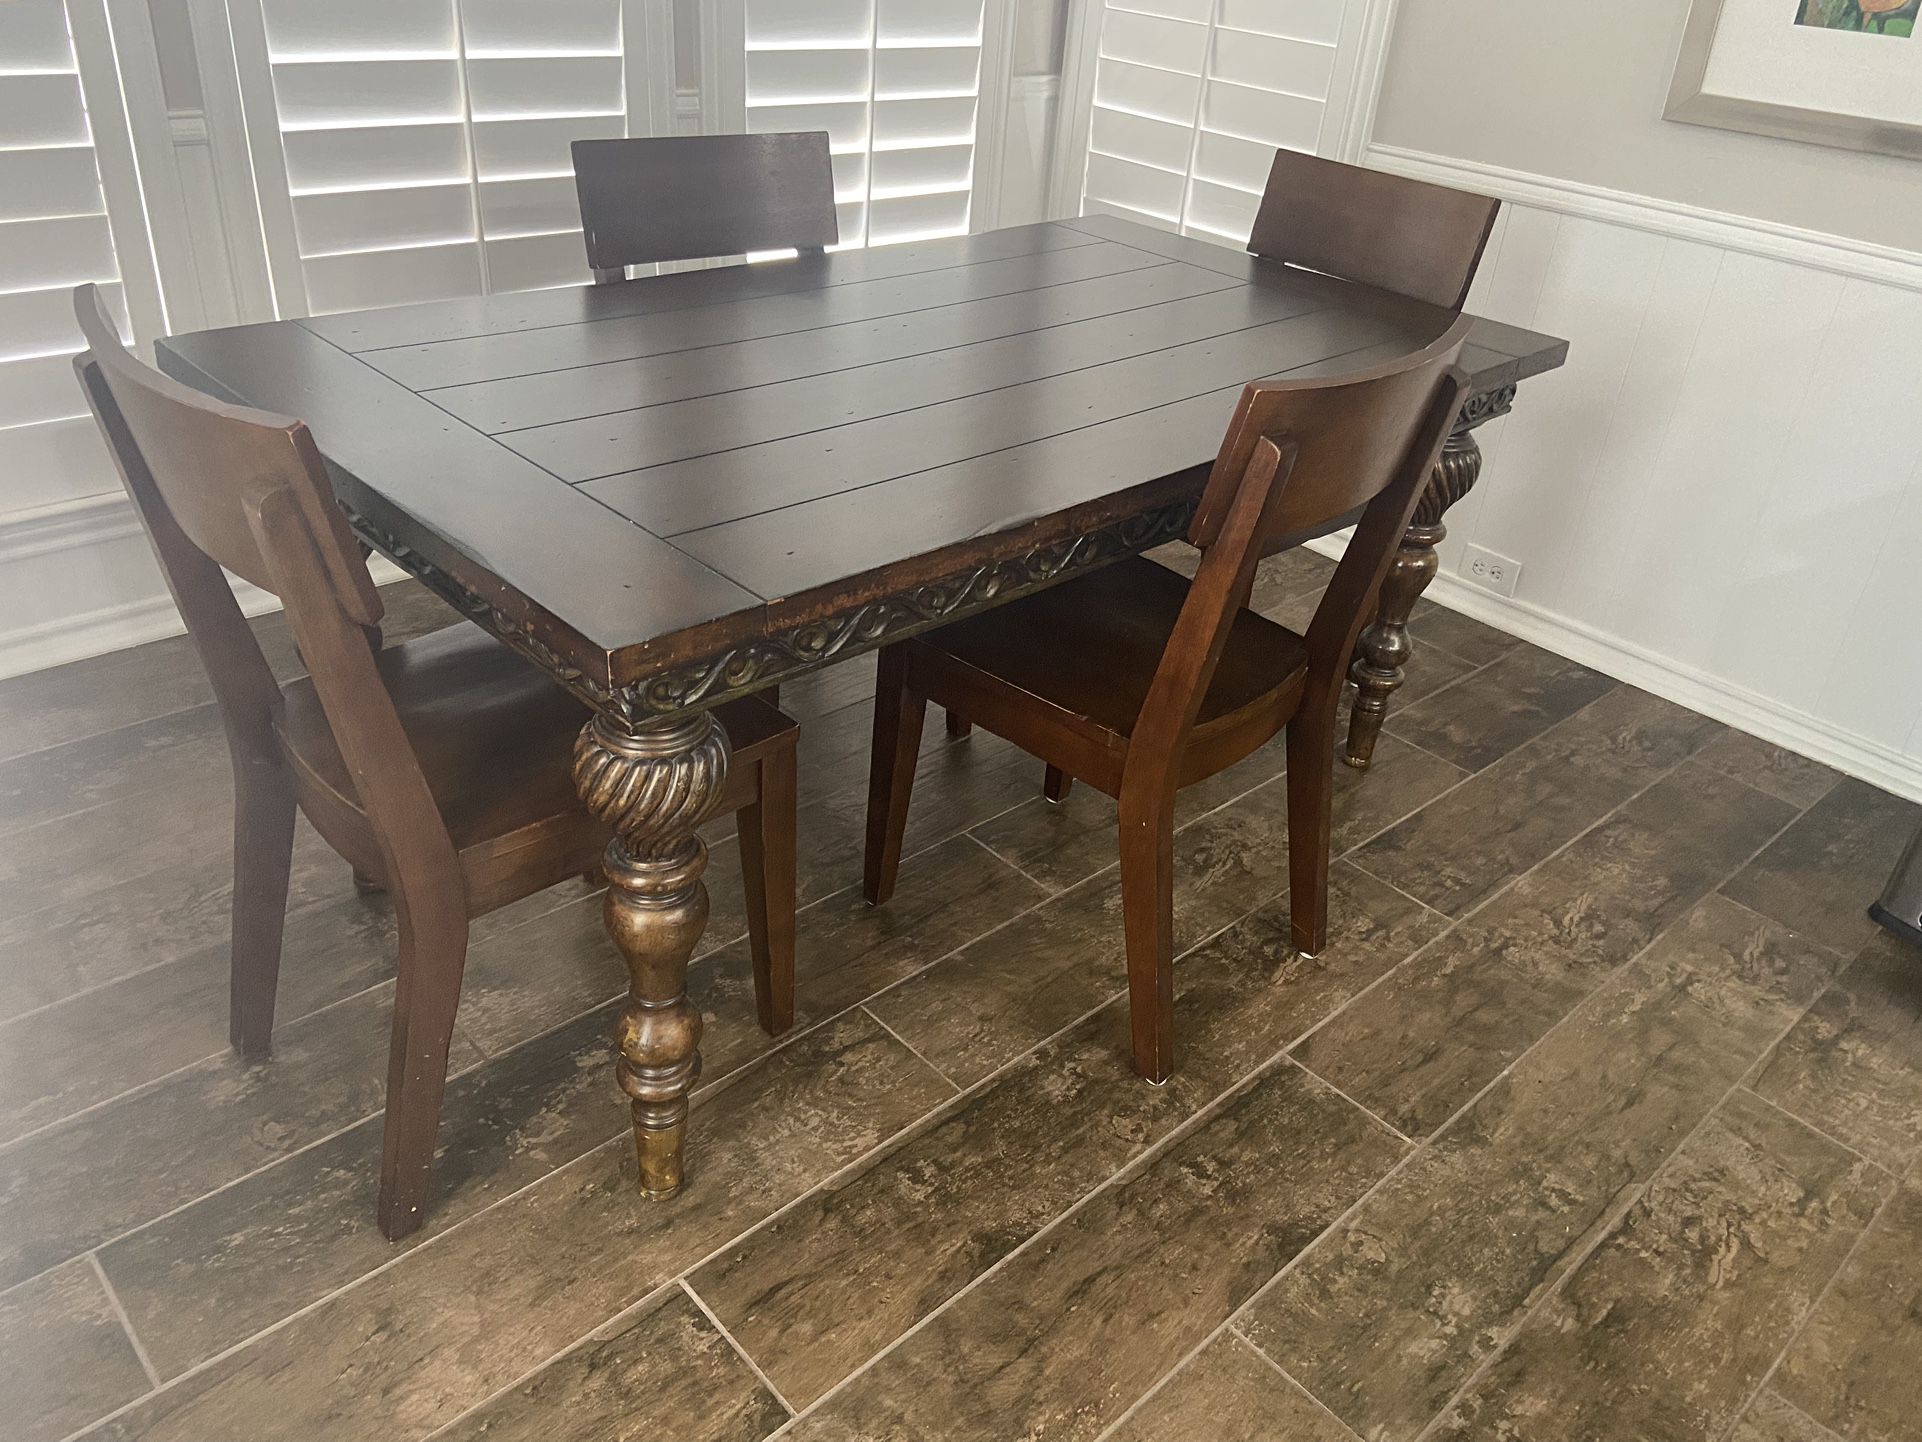 Wood Kitchen Table And 4 Chairs Delivered Dining Set $300 OBO